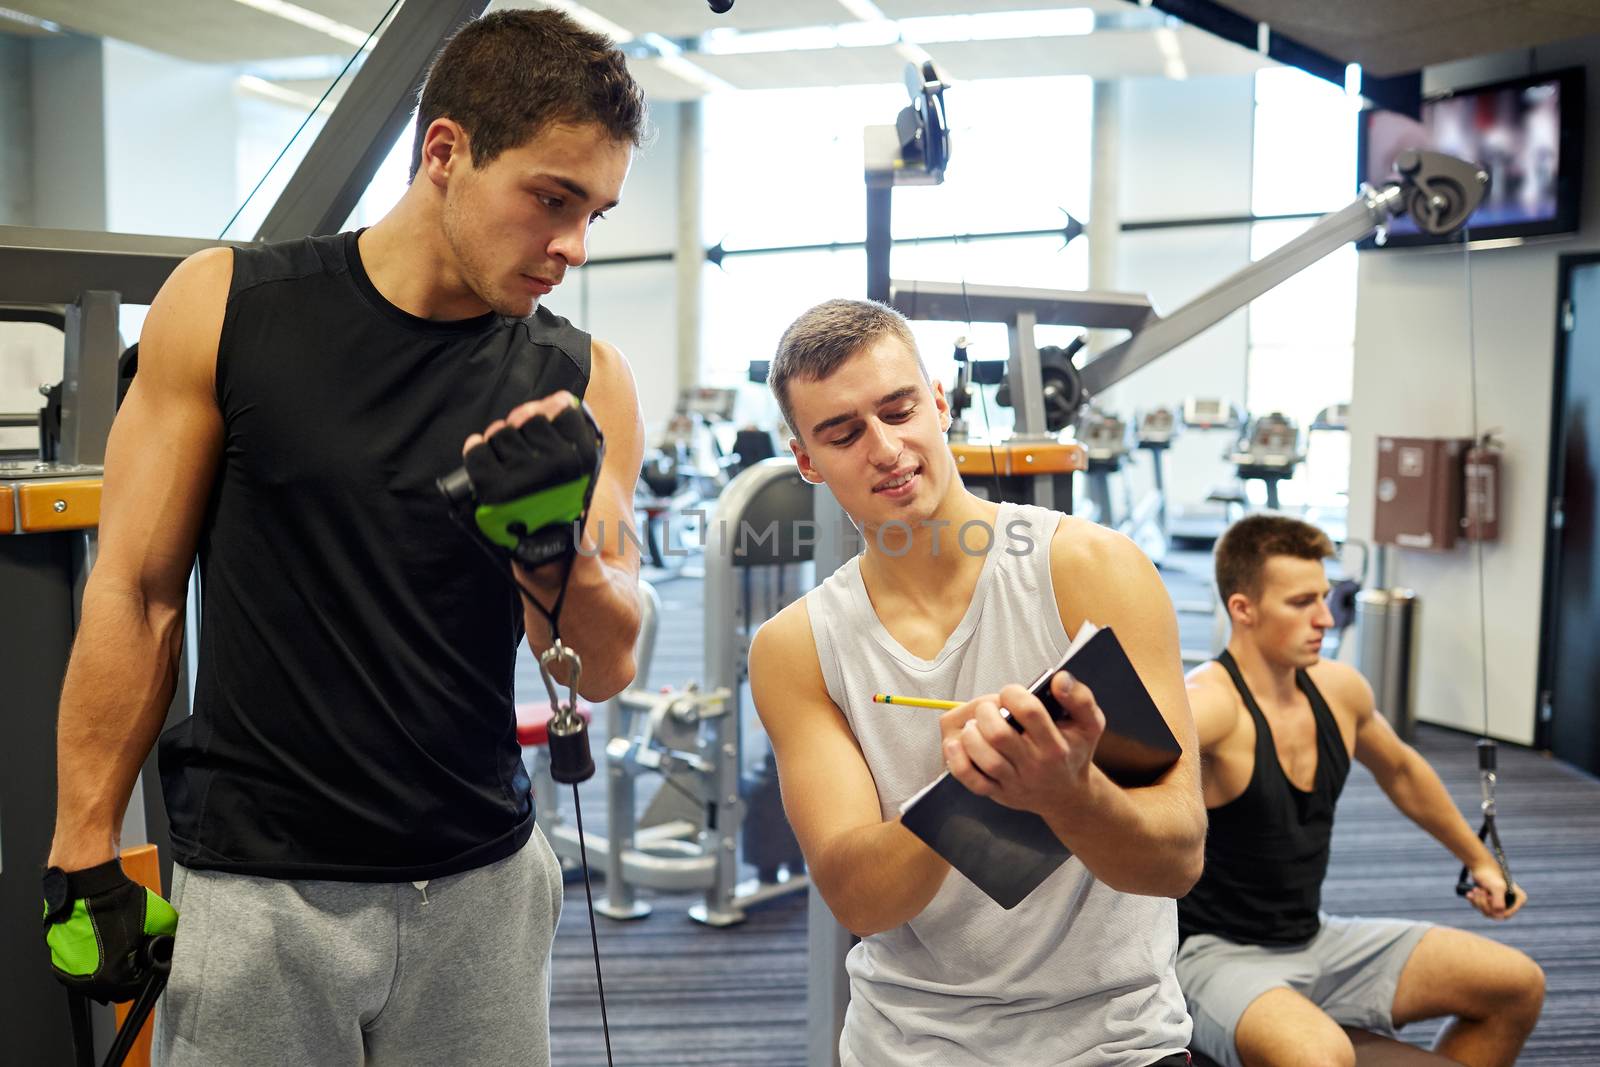 sport, fitness, lifestyle and people concept - men with clipboard taking notes and exercising on gym machine